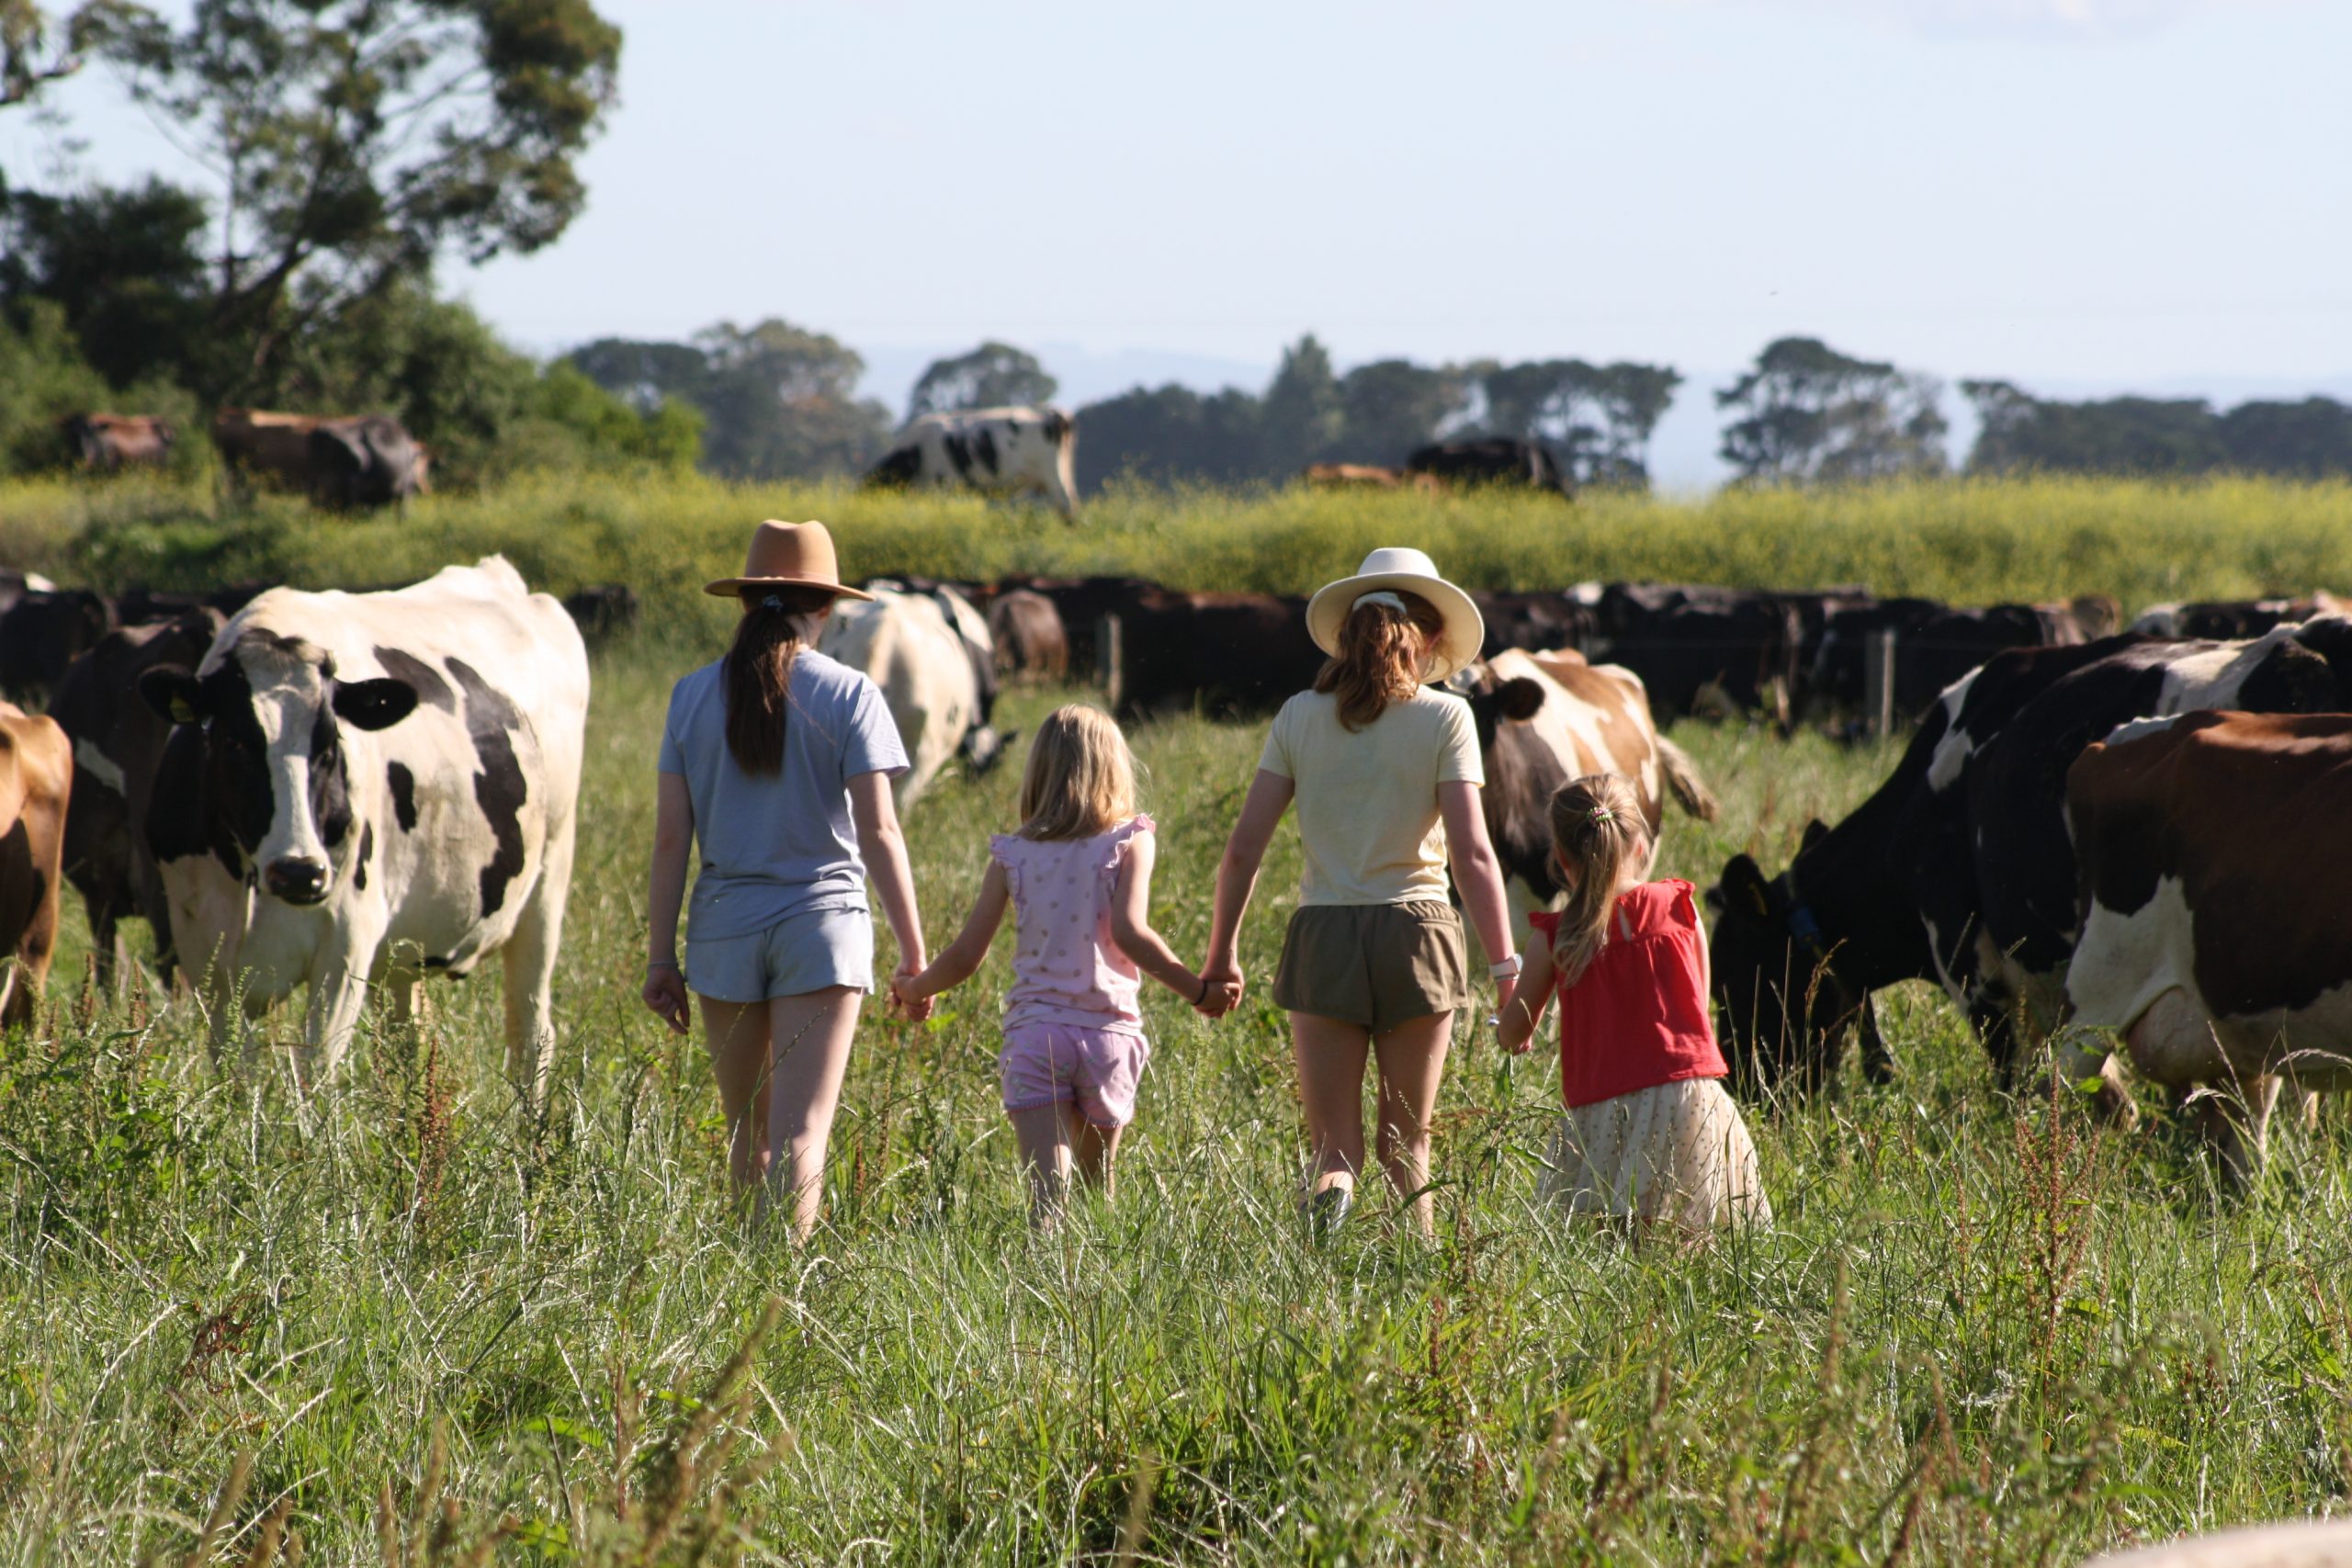 Four children walking through a paddock with dairy cows in background